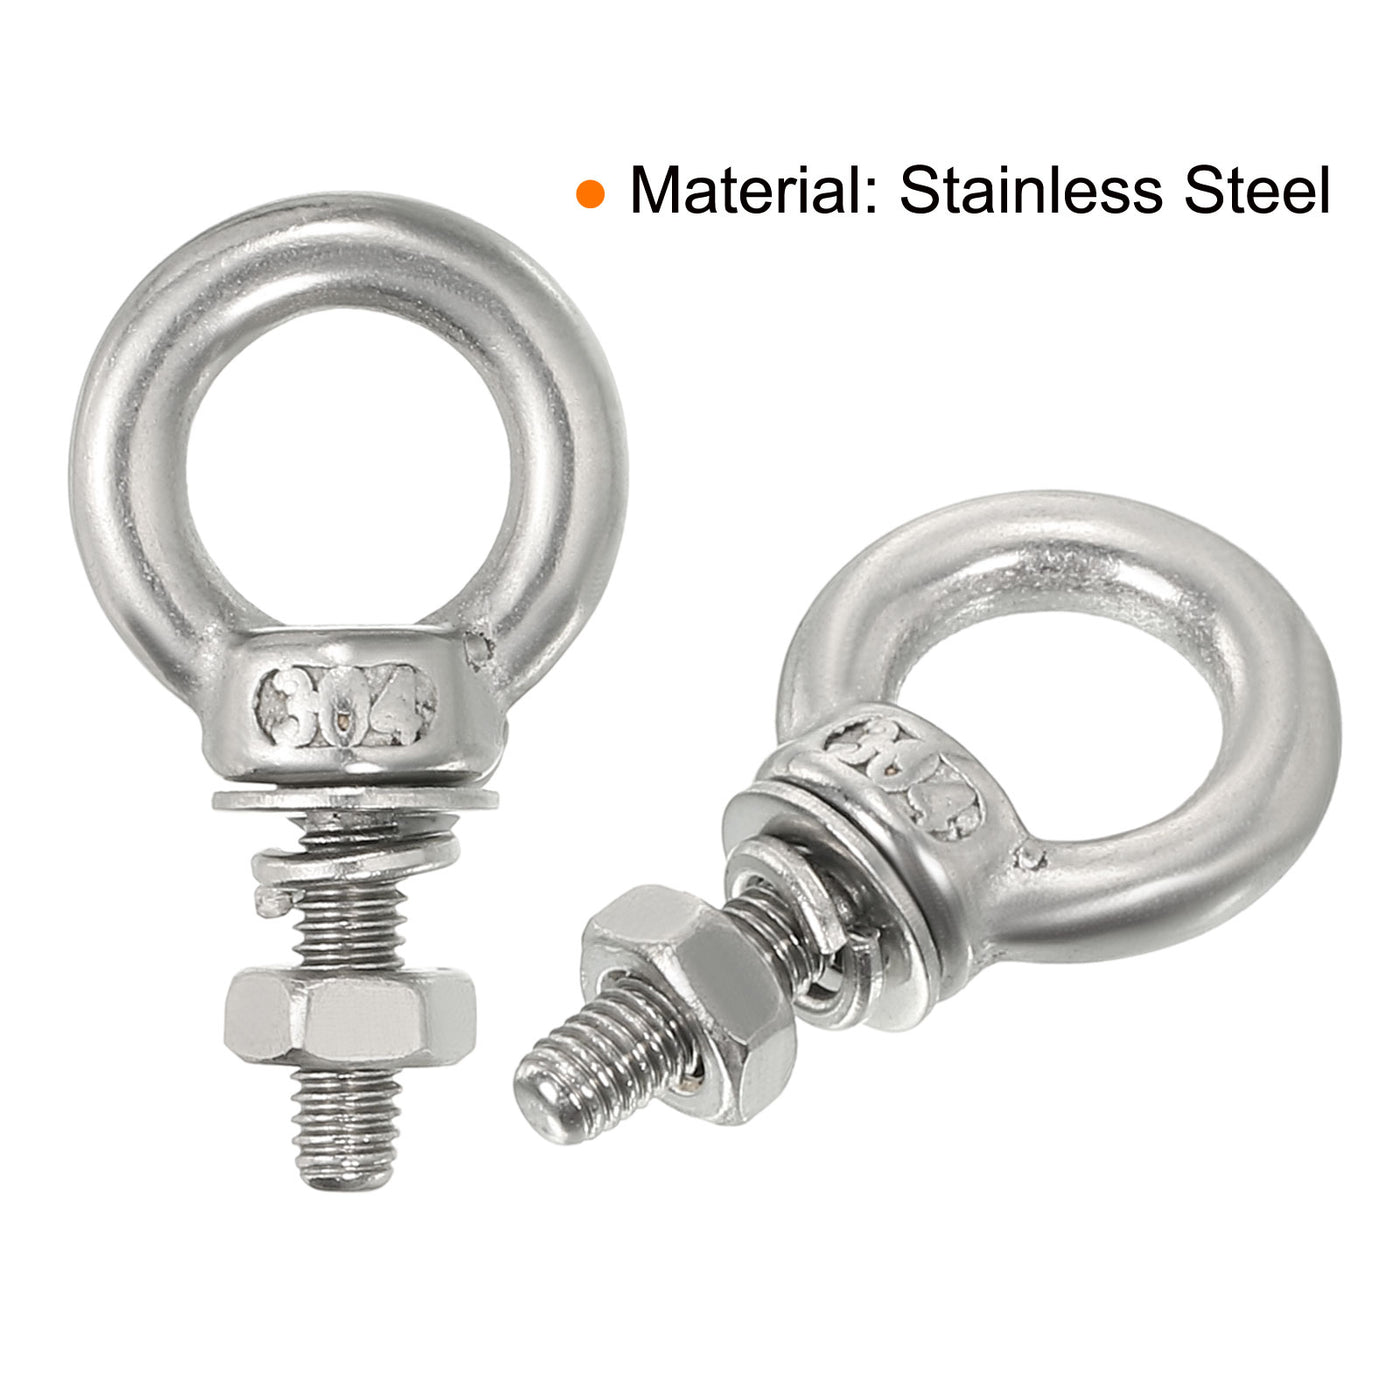 uxcell Uxcell M3x90 1/8"x3-1/2" Stainless Steel Eye Bolts Threaded Screw Eyebolt Shoulder Ring with Nuts Washers for Lifting Hanging, 10 Set